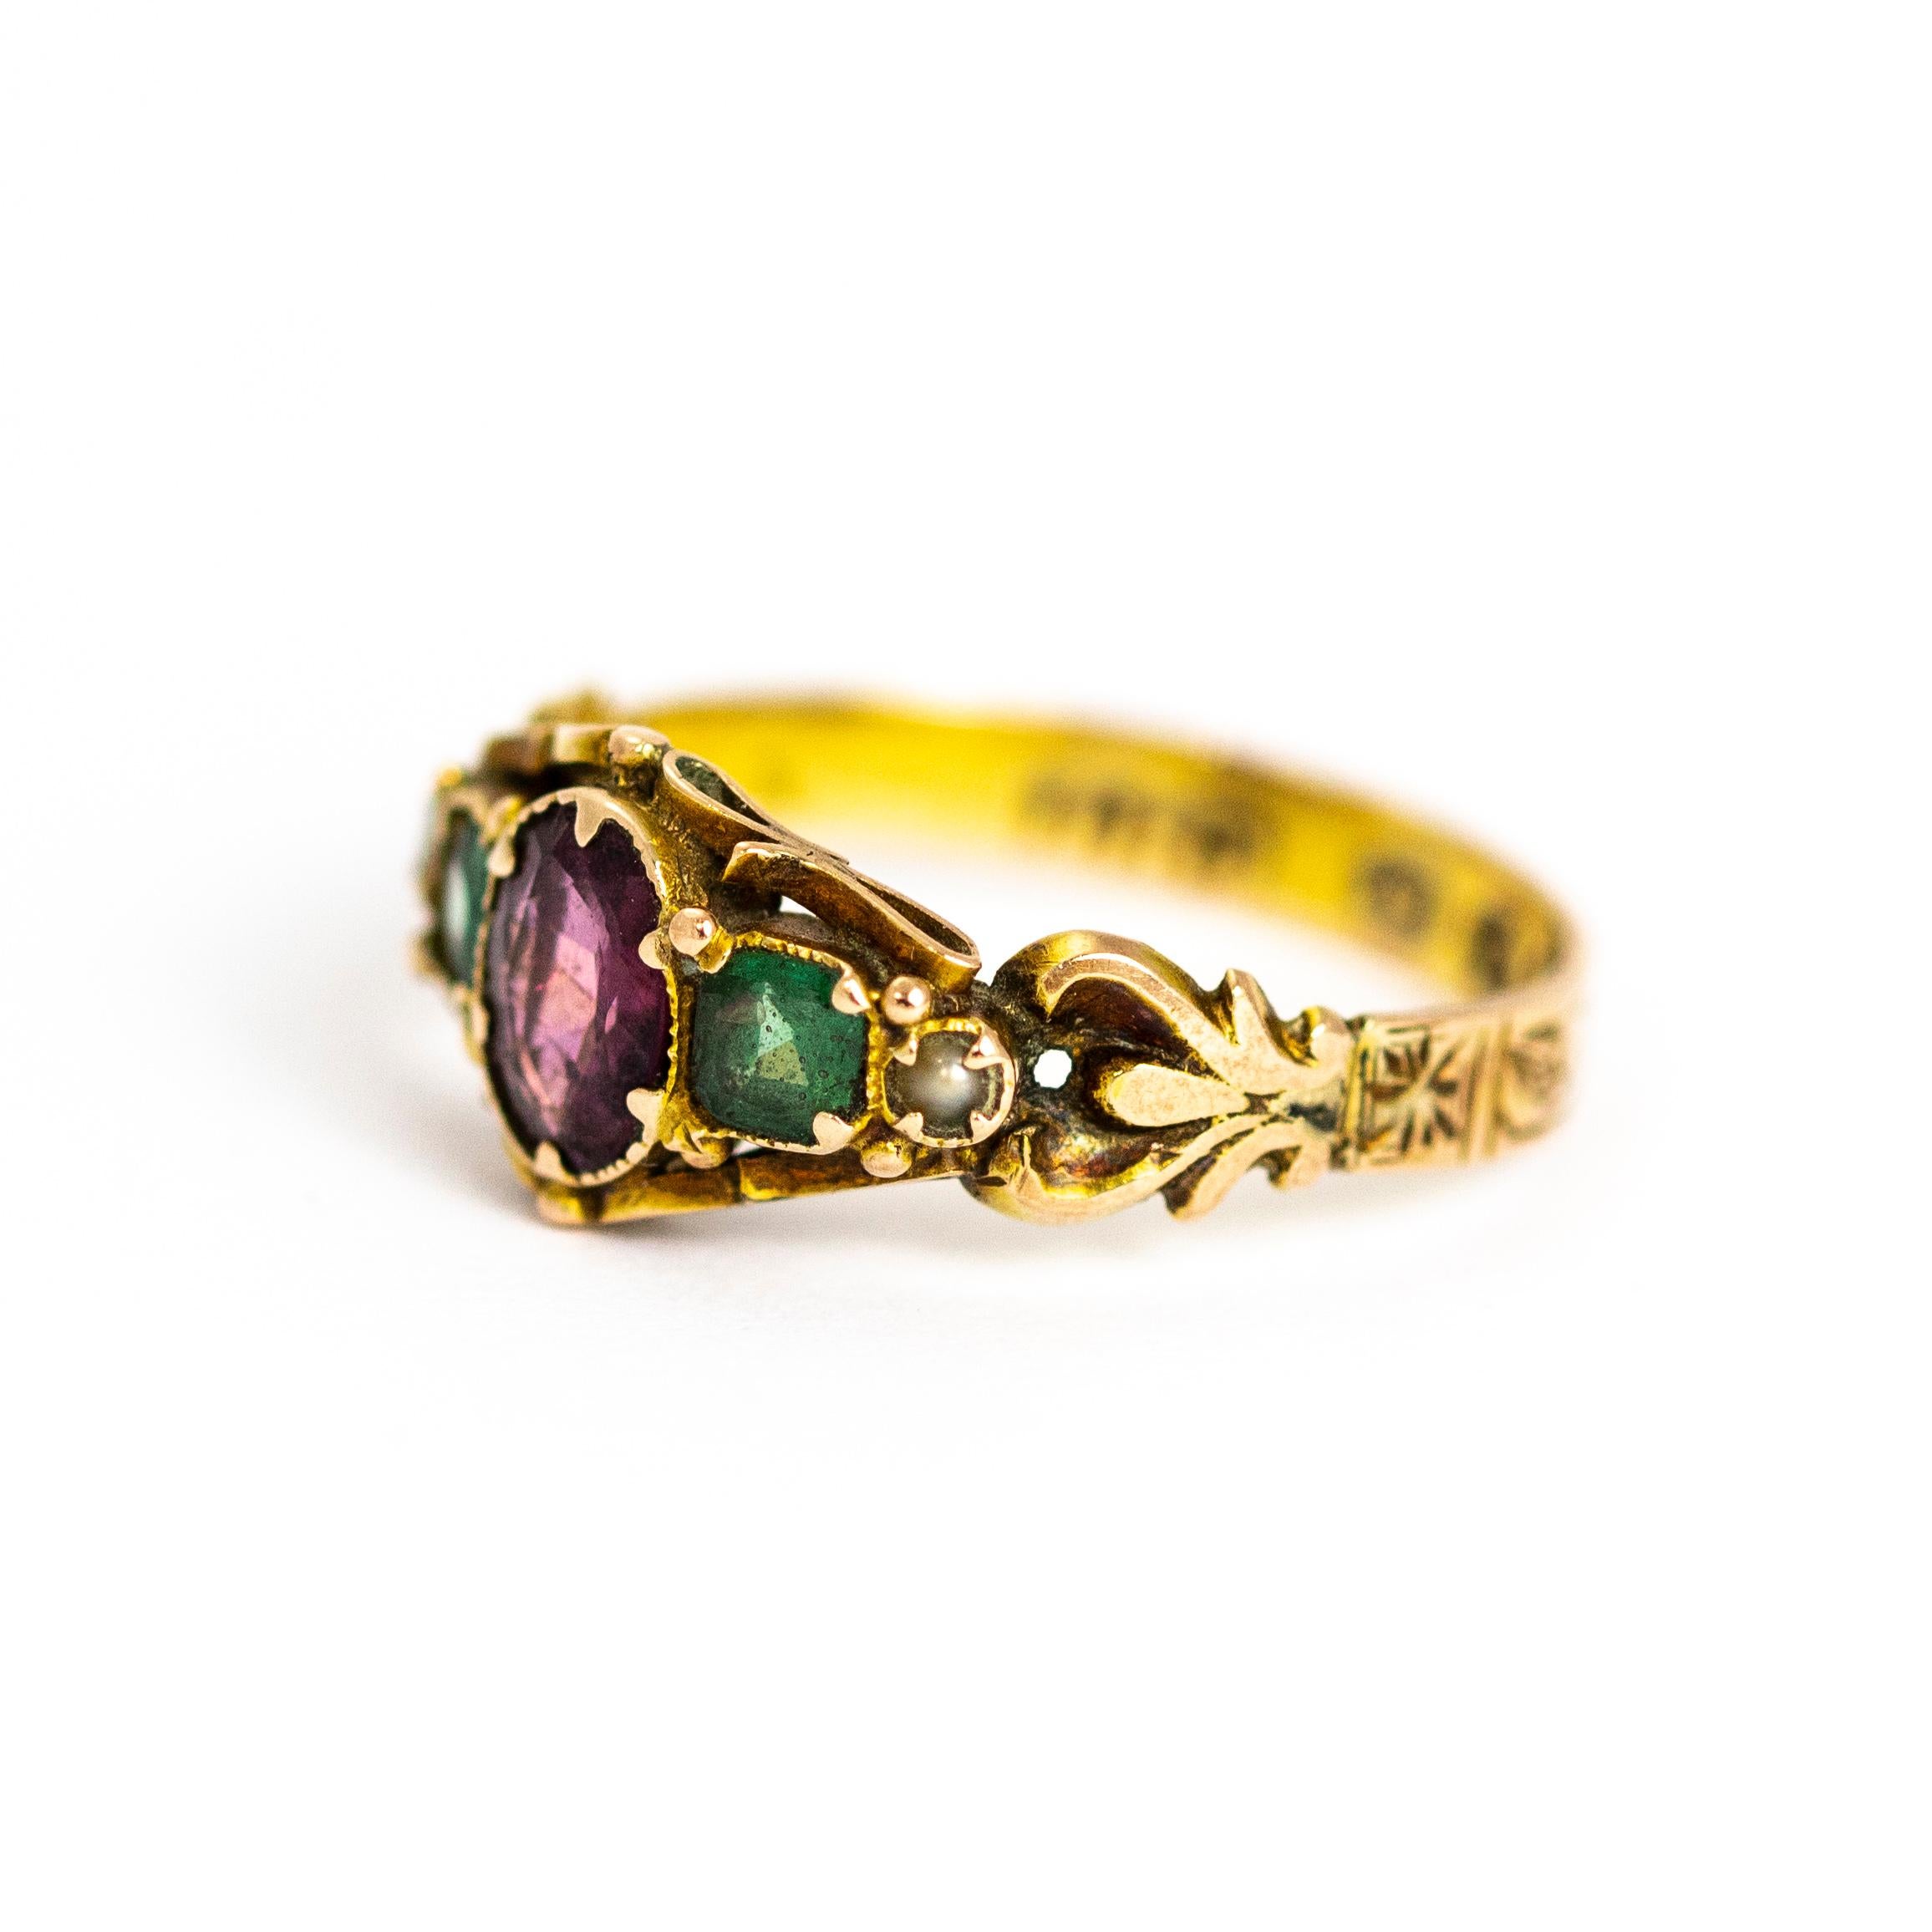 Lovely Late Georgian 12ct gold multi-stone ring of pearls, Emeralds and Amethyst. The band itself is so decorative, the shoulders have a double scroll detail and all the way around is delicate scroll engraving. Made in Birmingham, England.

Ring